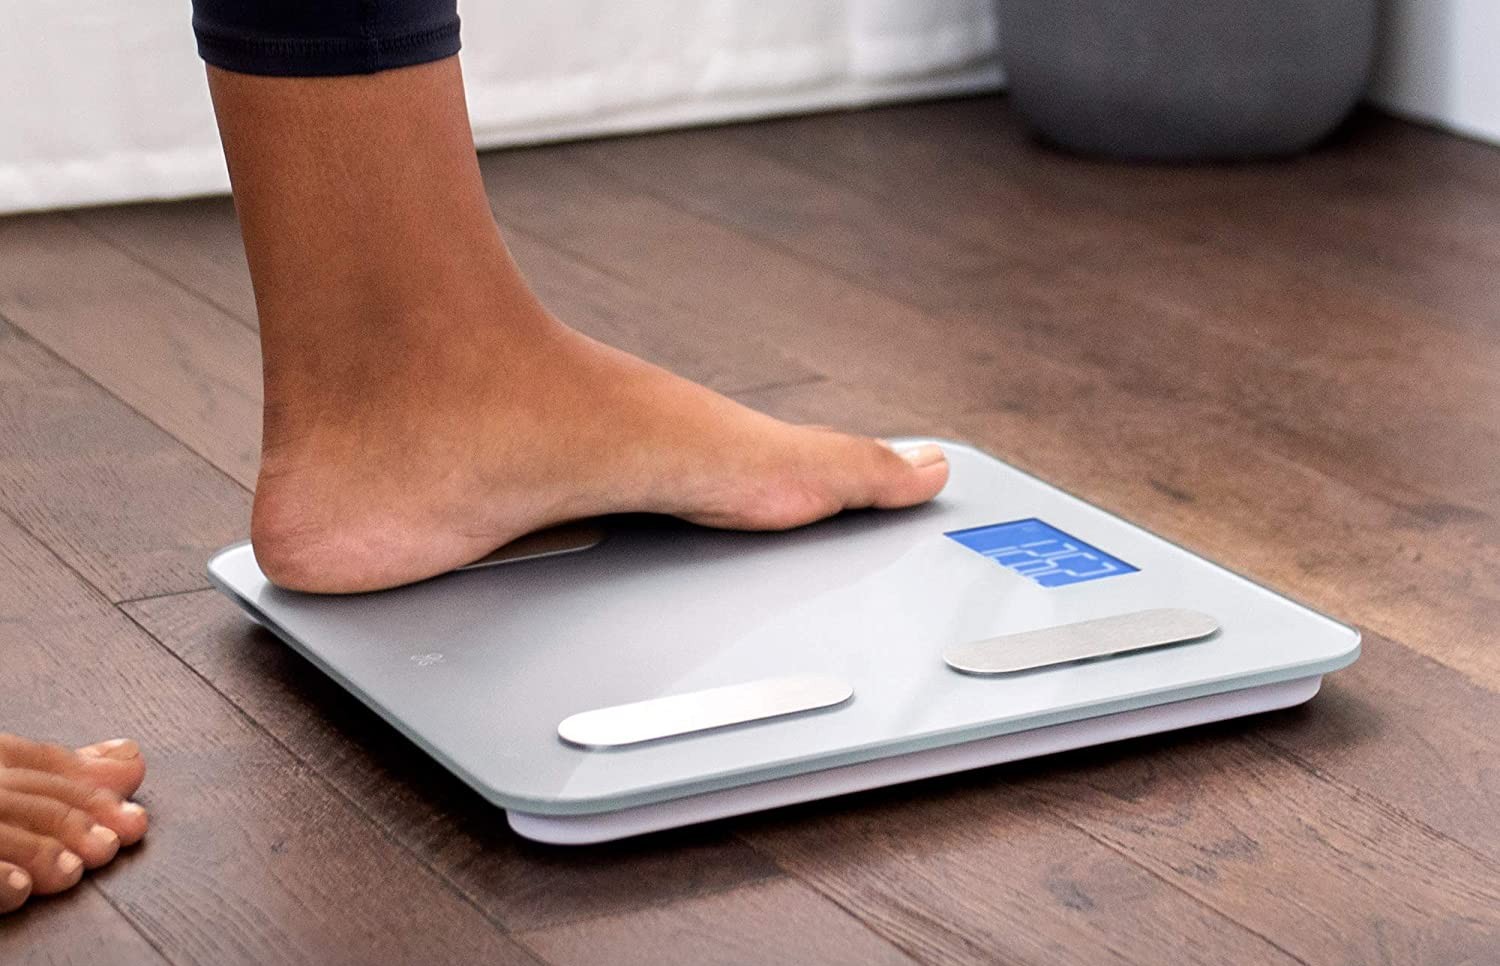 Vitafit Digital Body Weight Bathroom Scale Weighing Scale Review - Starx  Deals - Quora